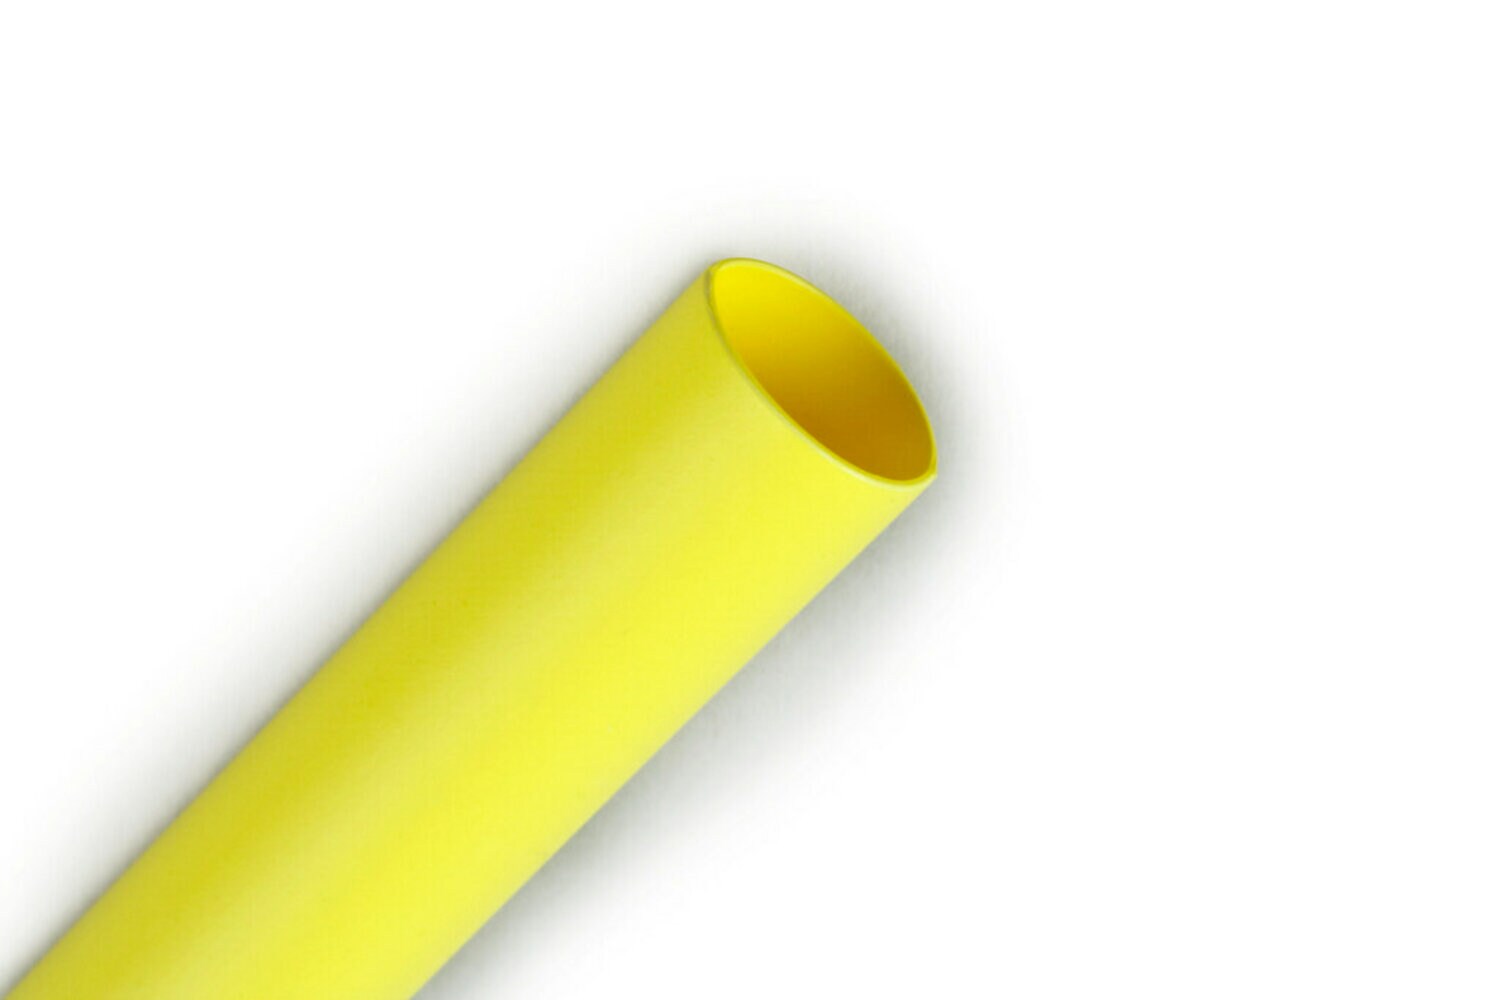 7010297800 - 3M Heat Shrink Thin-Wall Tubing FP-301-1/16-48"-Yellow-250 Pcs, 48 in
Length sticks, 250 pieces/case